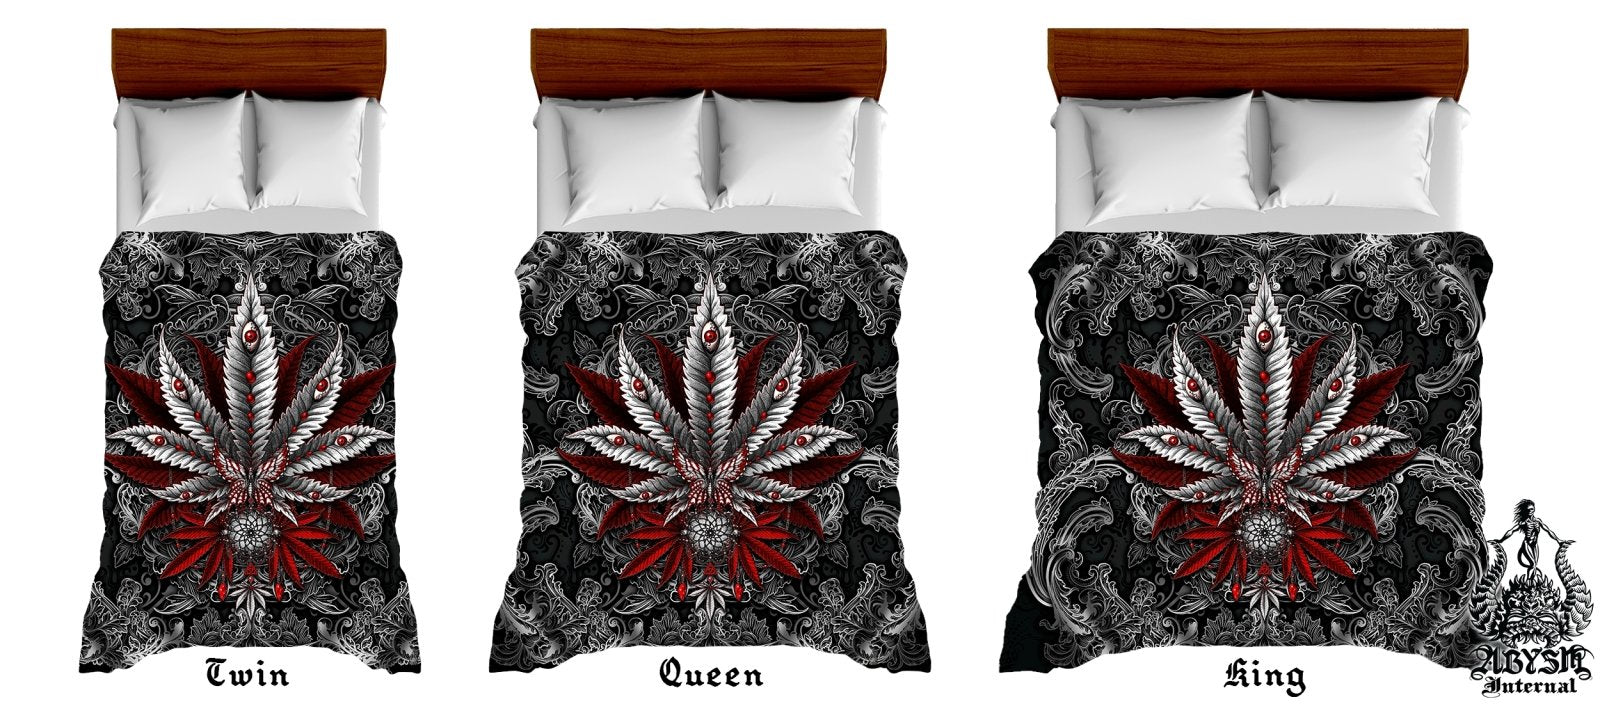 Gothic Weed Bedding Set, Comforter and Duvet, Cannabis Bed Cover, Marijuana Bedroom Decor, King, Queen and Twin Size, 420 Room Art - Dark - Abysm Internal